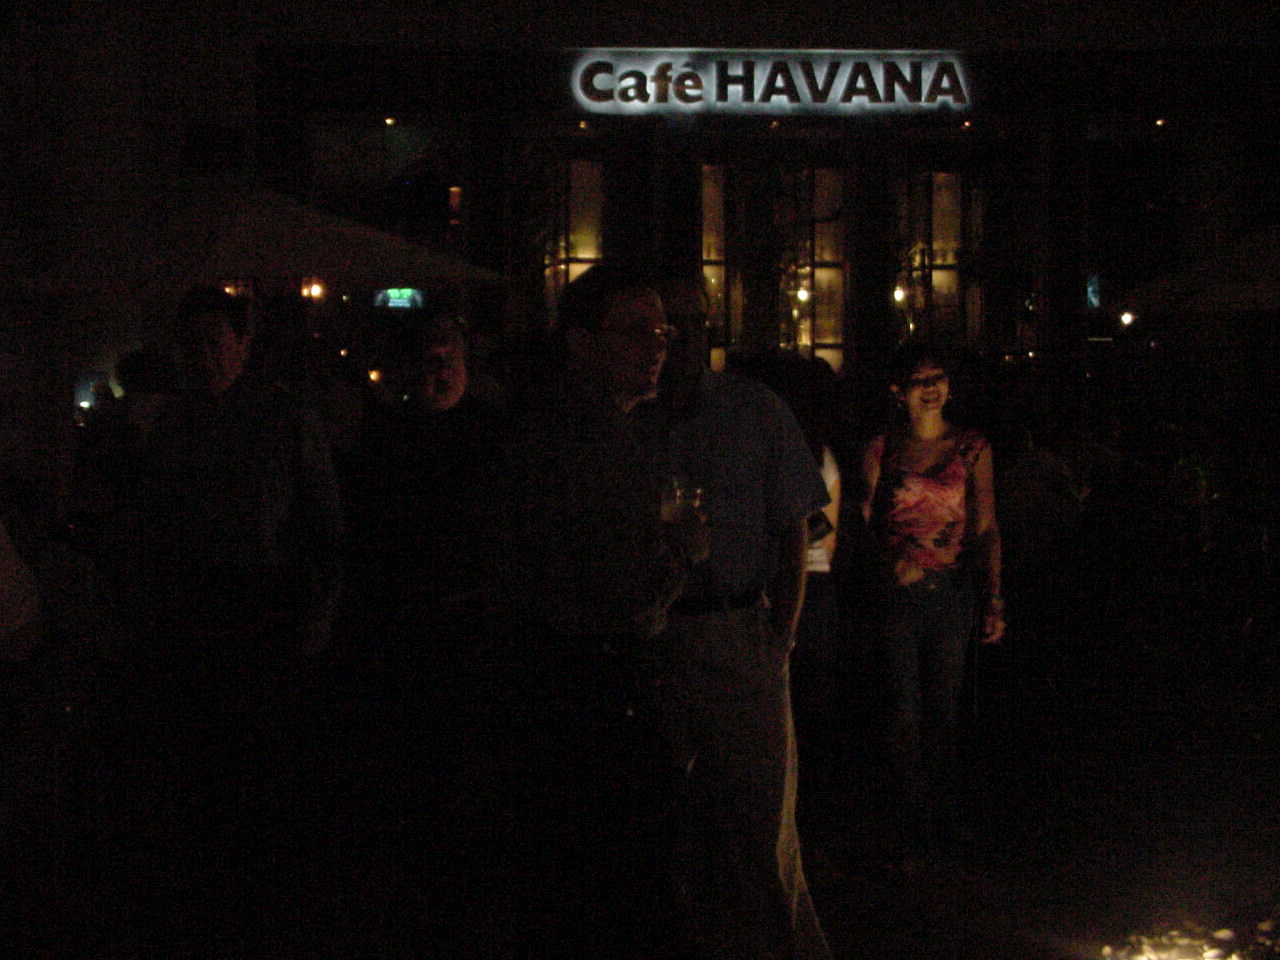 Cafe Havana.One of the hottest spots in town.